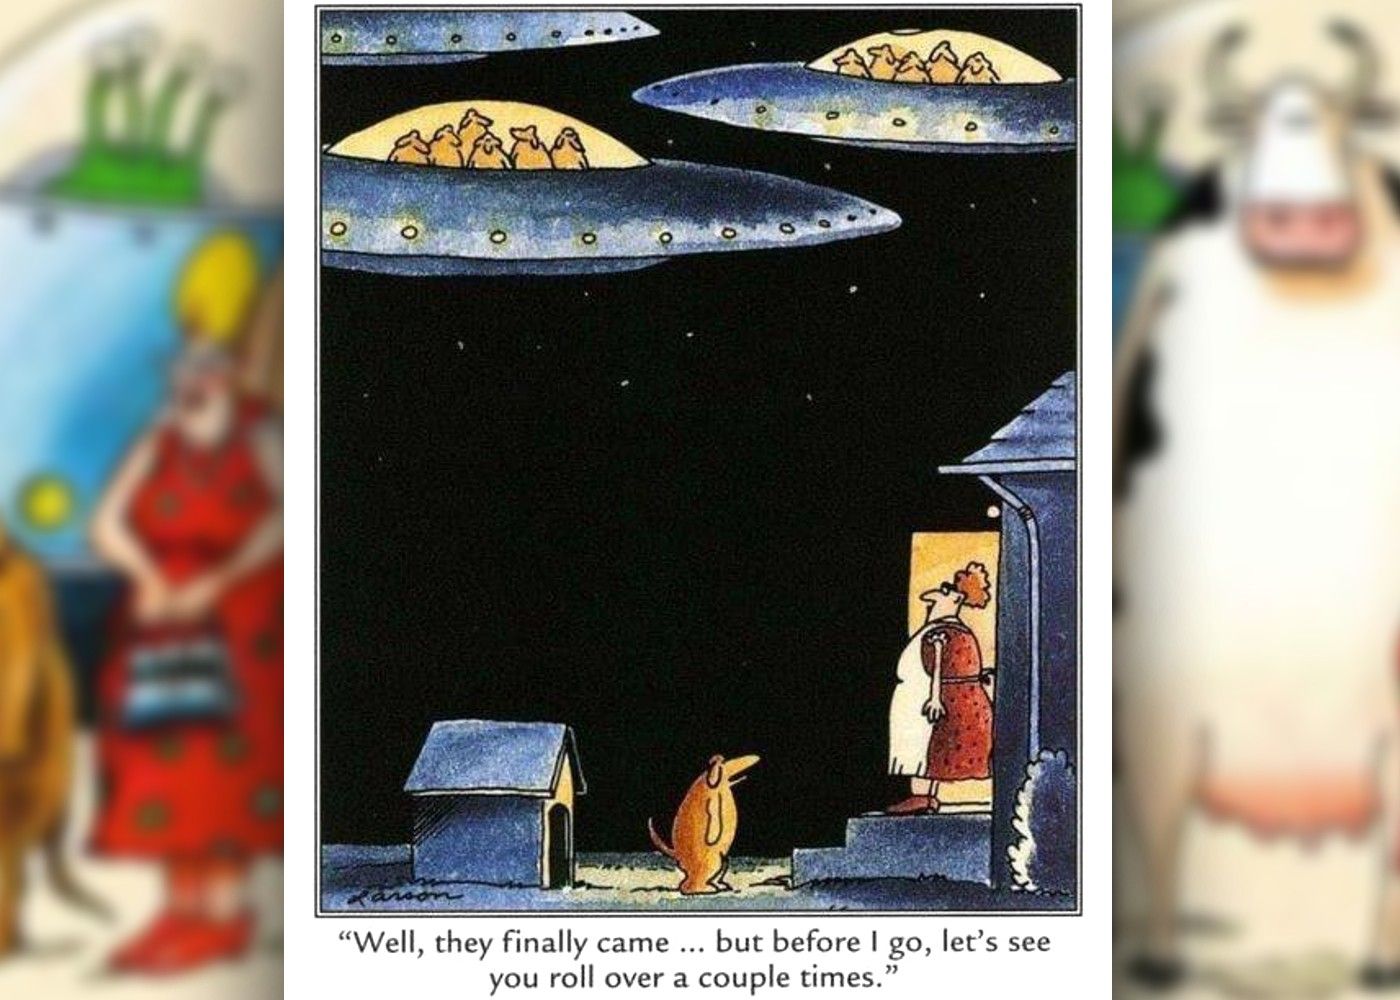 far side comic where a dog is revealed to be an alien, ordering its owner to roll over